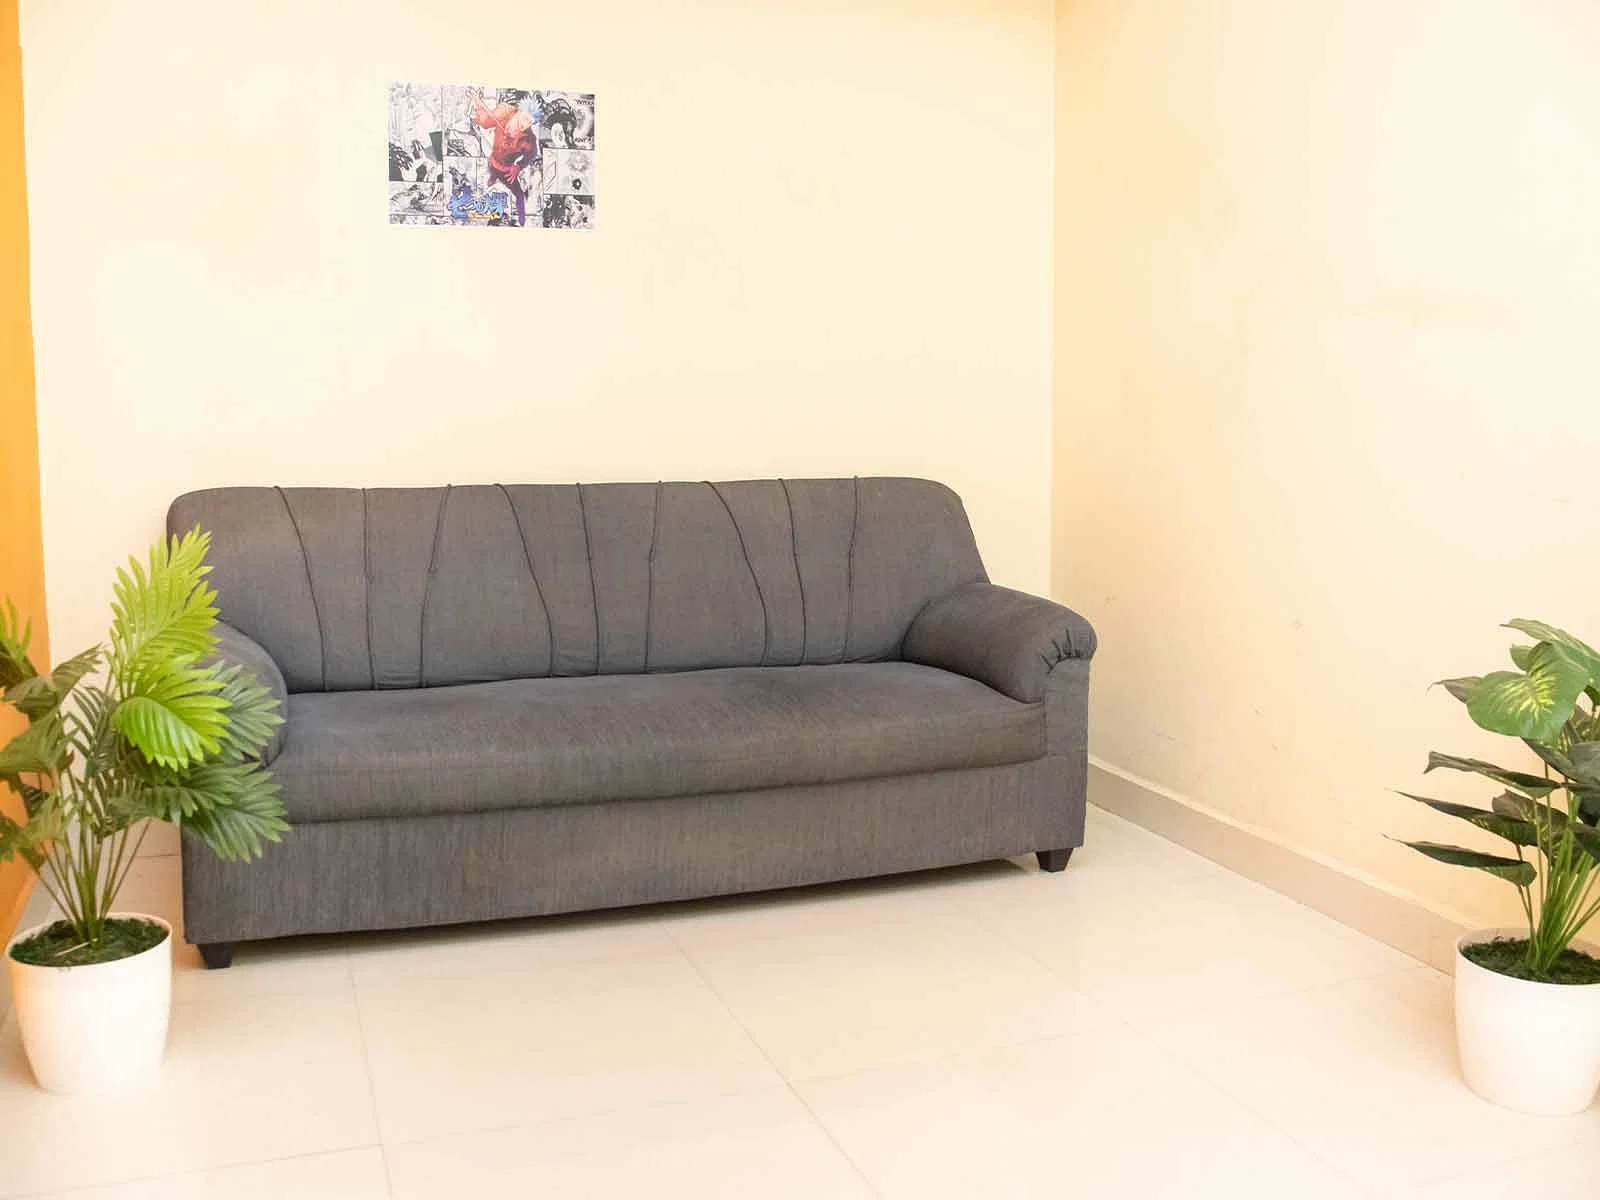 luxury PG accommodations with modern Wi-Fi, AC, and TV in Electronic City Phase 1-Bangalore-Zolo Selene